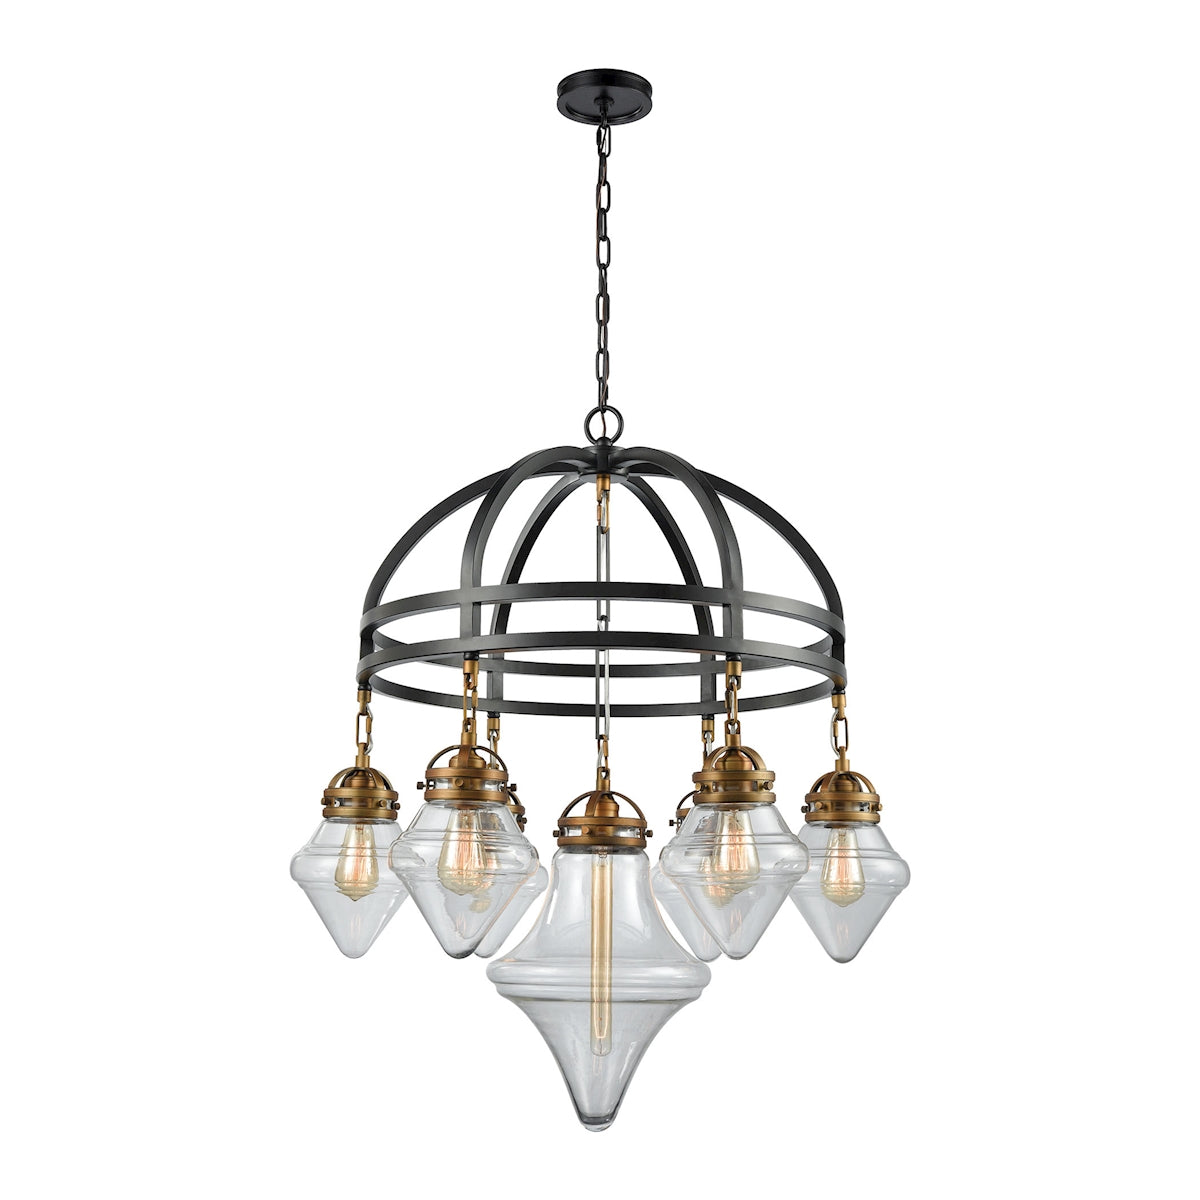 ELK Lighting 16461/7 Gramercy 7-Light Chandelier in Classic Brass and Oil Rubbed Bronze with Clear Glass